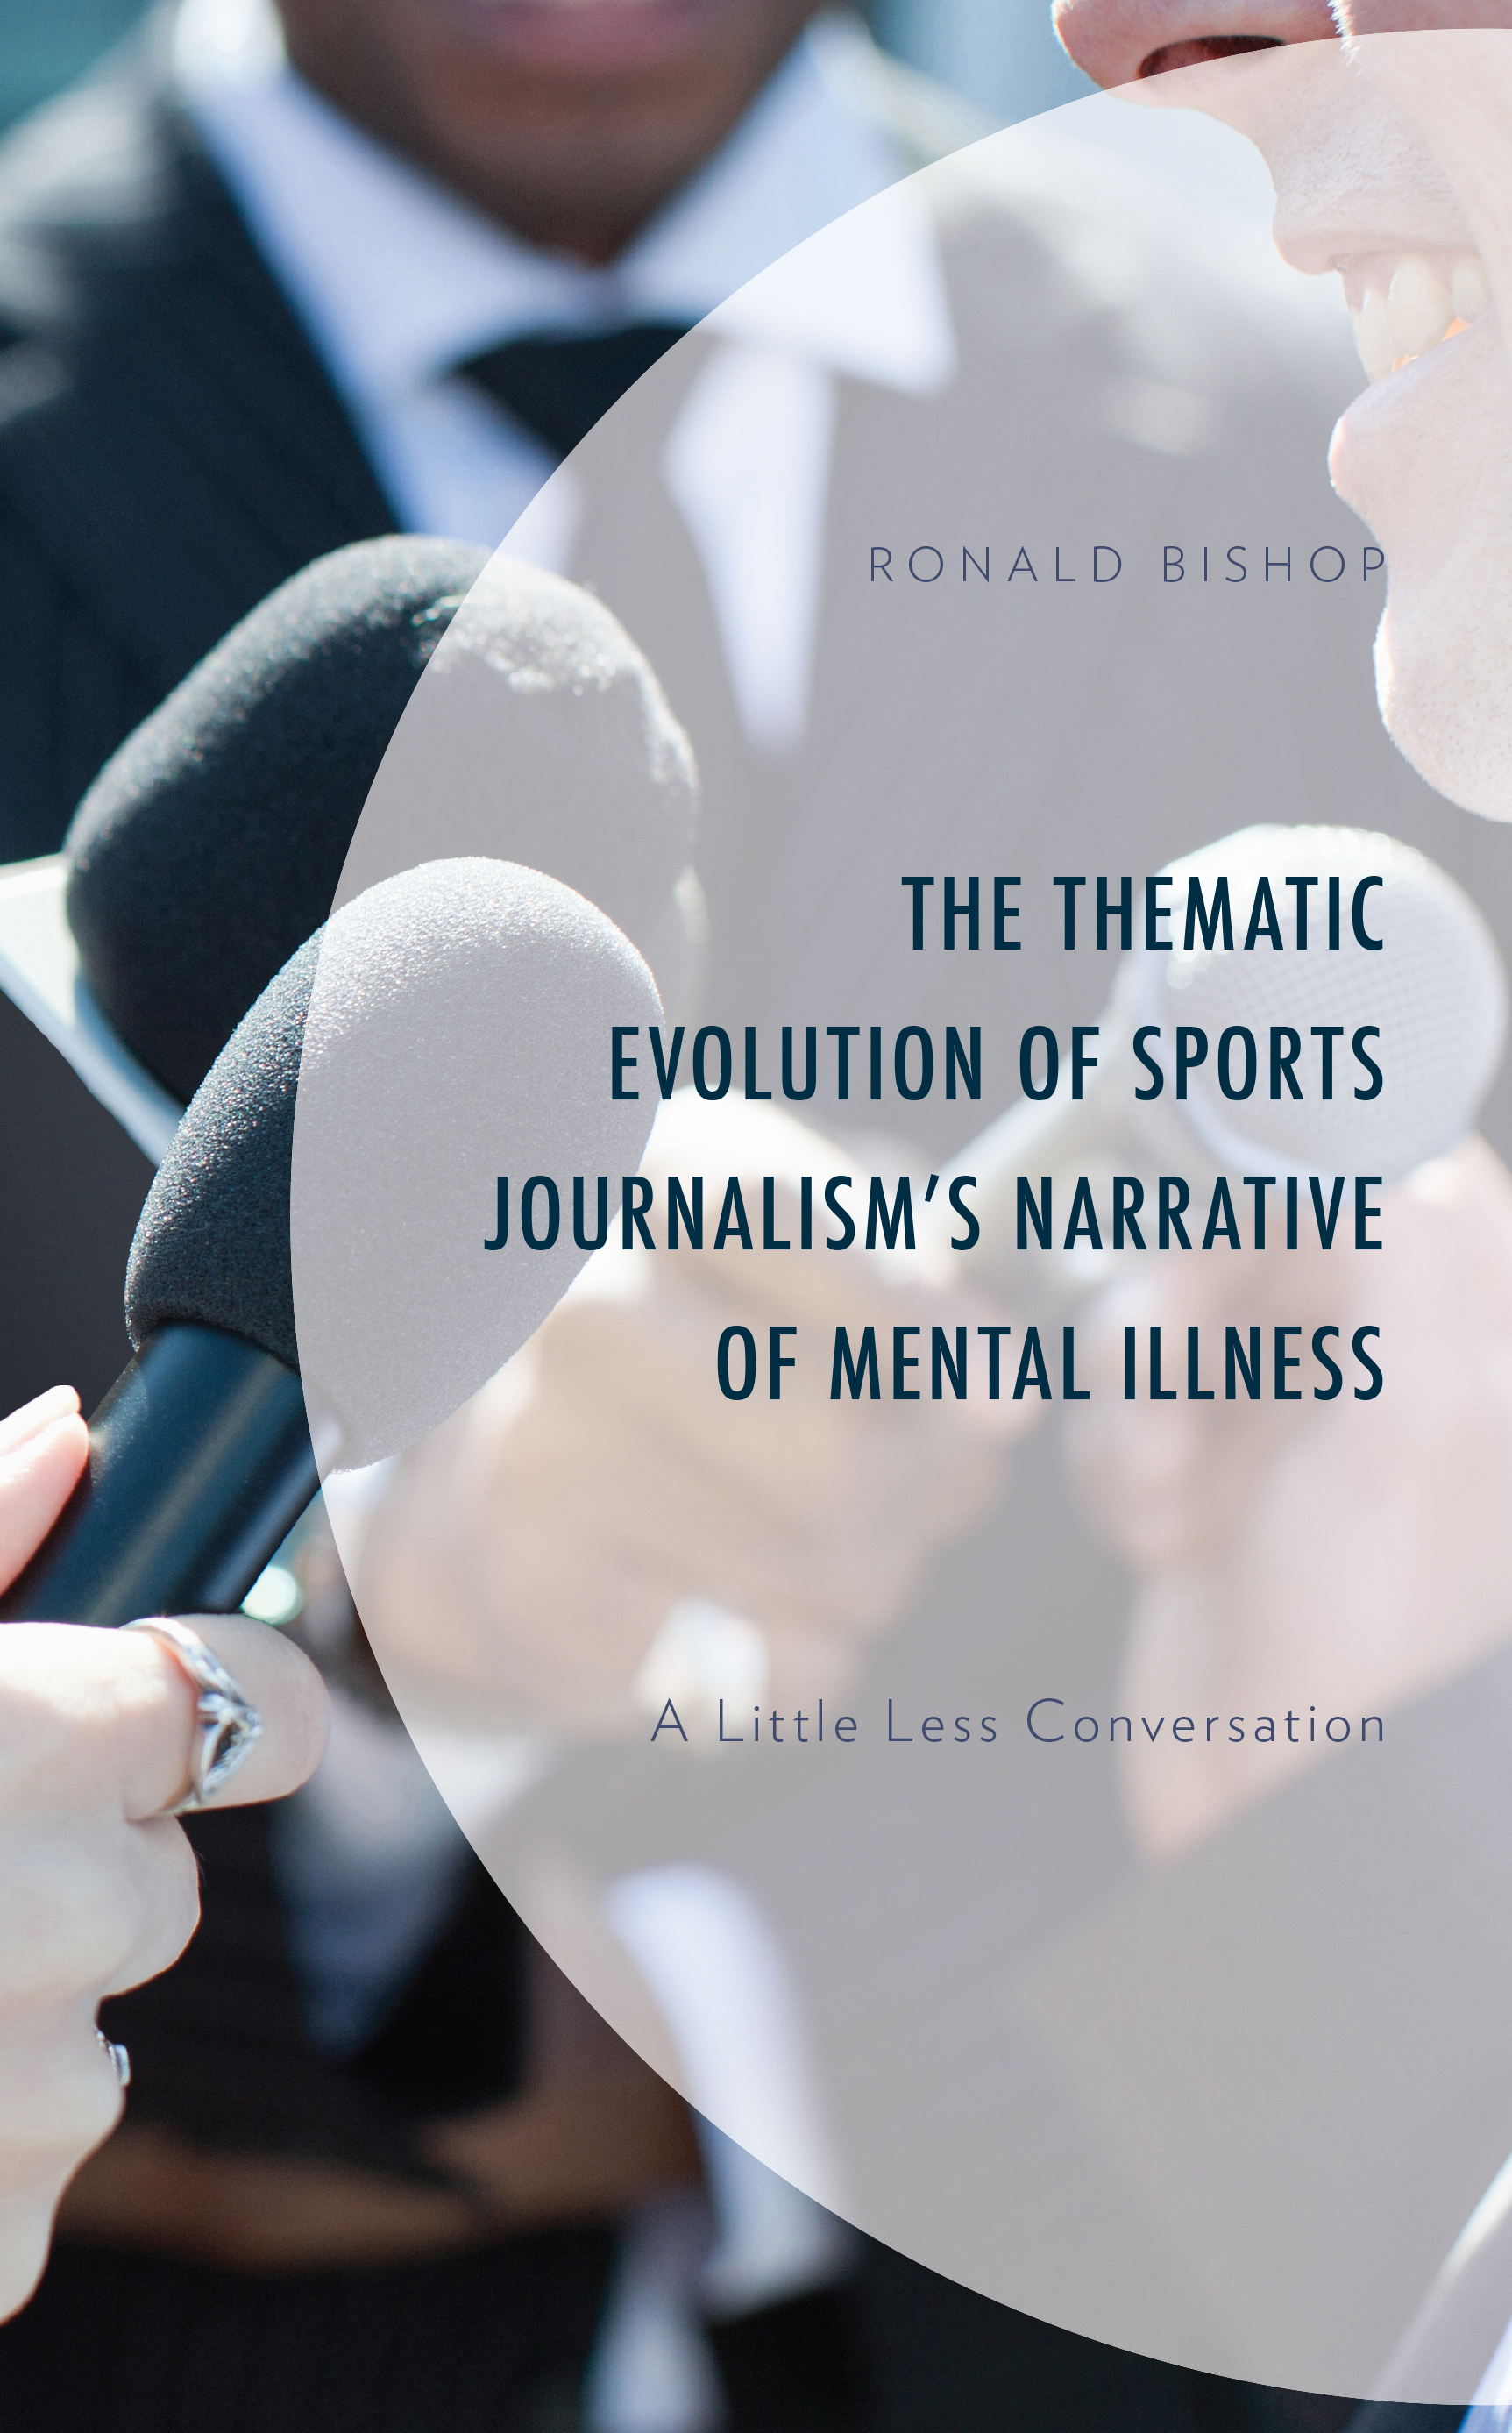 The Thematic Evolution of Sports Journalism's Narrative of Mental Illness: A Little Less Conversation